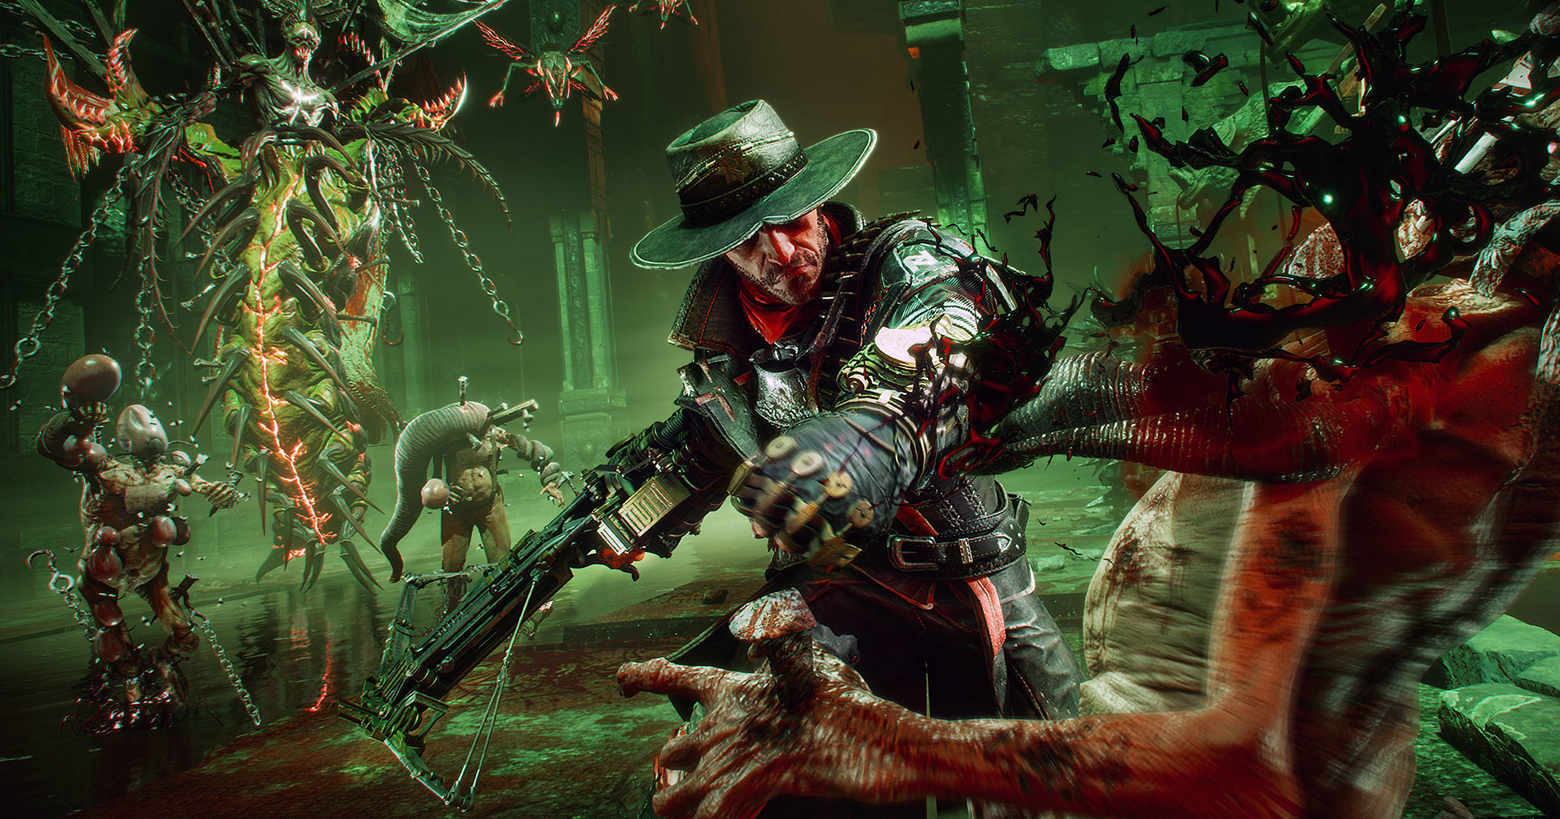 Jesse Rentier, the protagonist, and gunslinger from the Evil West game can be seen from the American perspective in the center of the picture, as he is smashing the head of a vampire in the foreground with his left fist, so that the blood spurts out. In his right hand, he holds a crossbow. In the background, various other creatures can be seen approaching the main character. The scene is currently taking place in a kind of hall and is illuminated with a poisonous greenish light. The gameplay is very action-packed and the game can also be played in co-op in third-person mode.